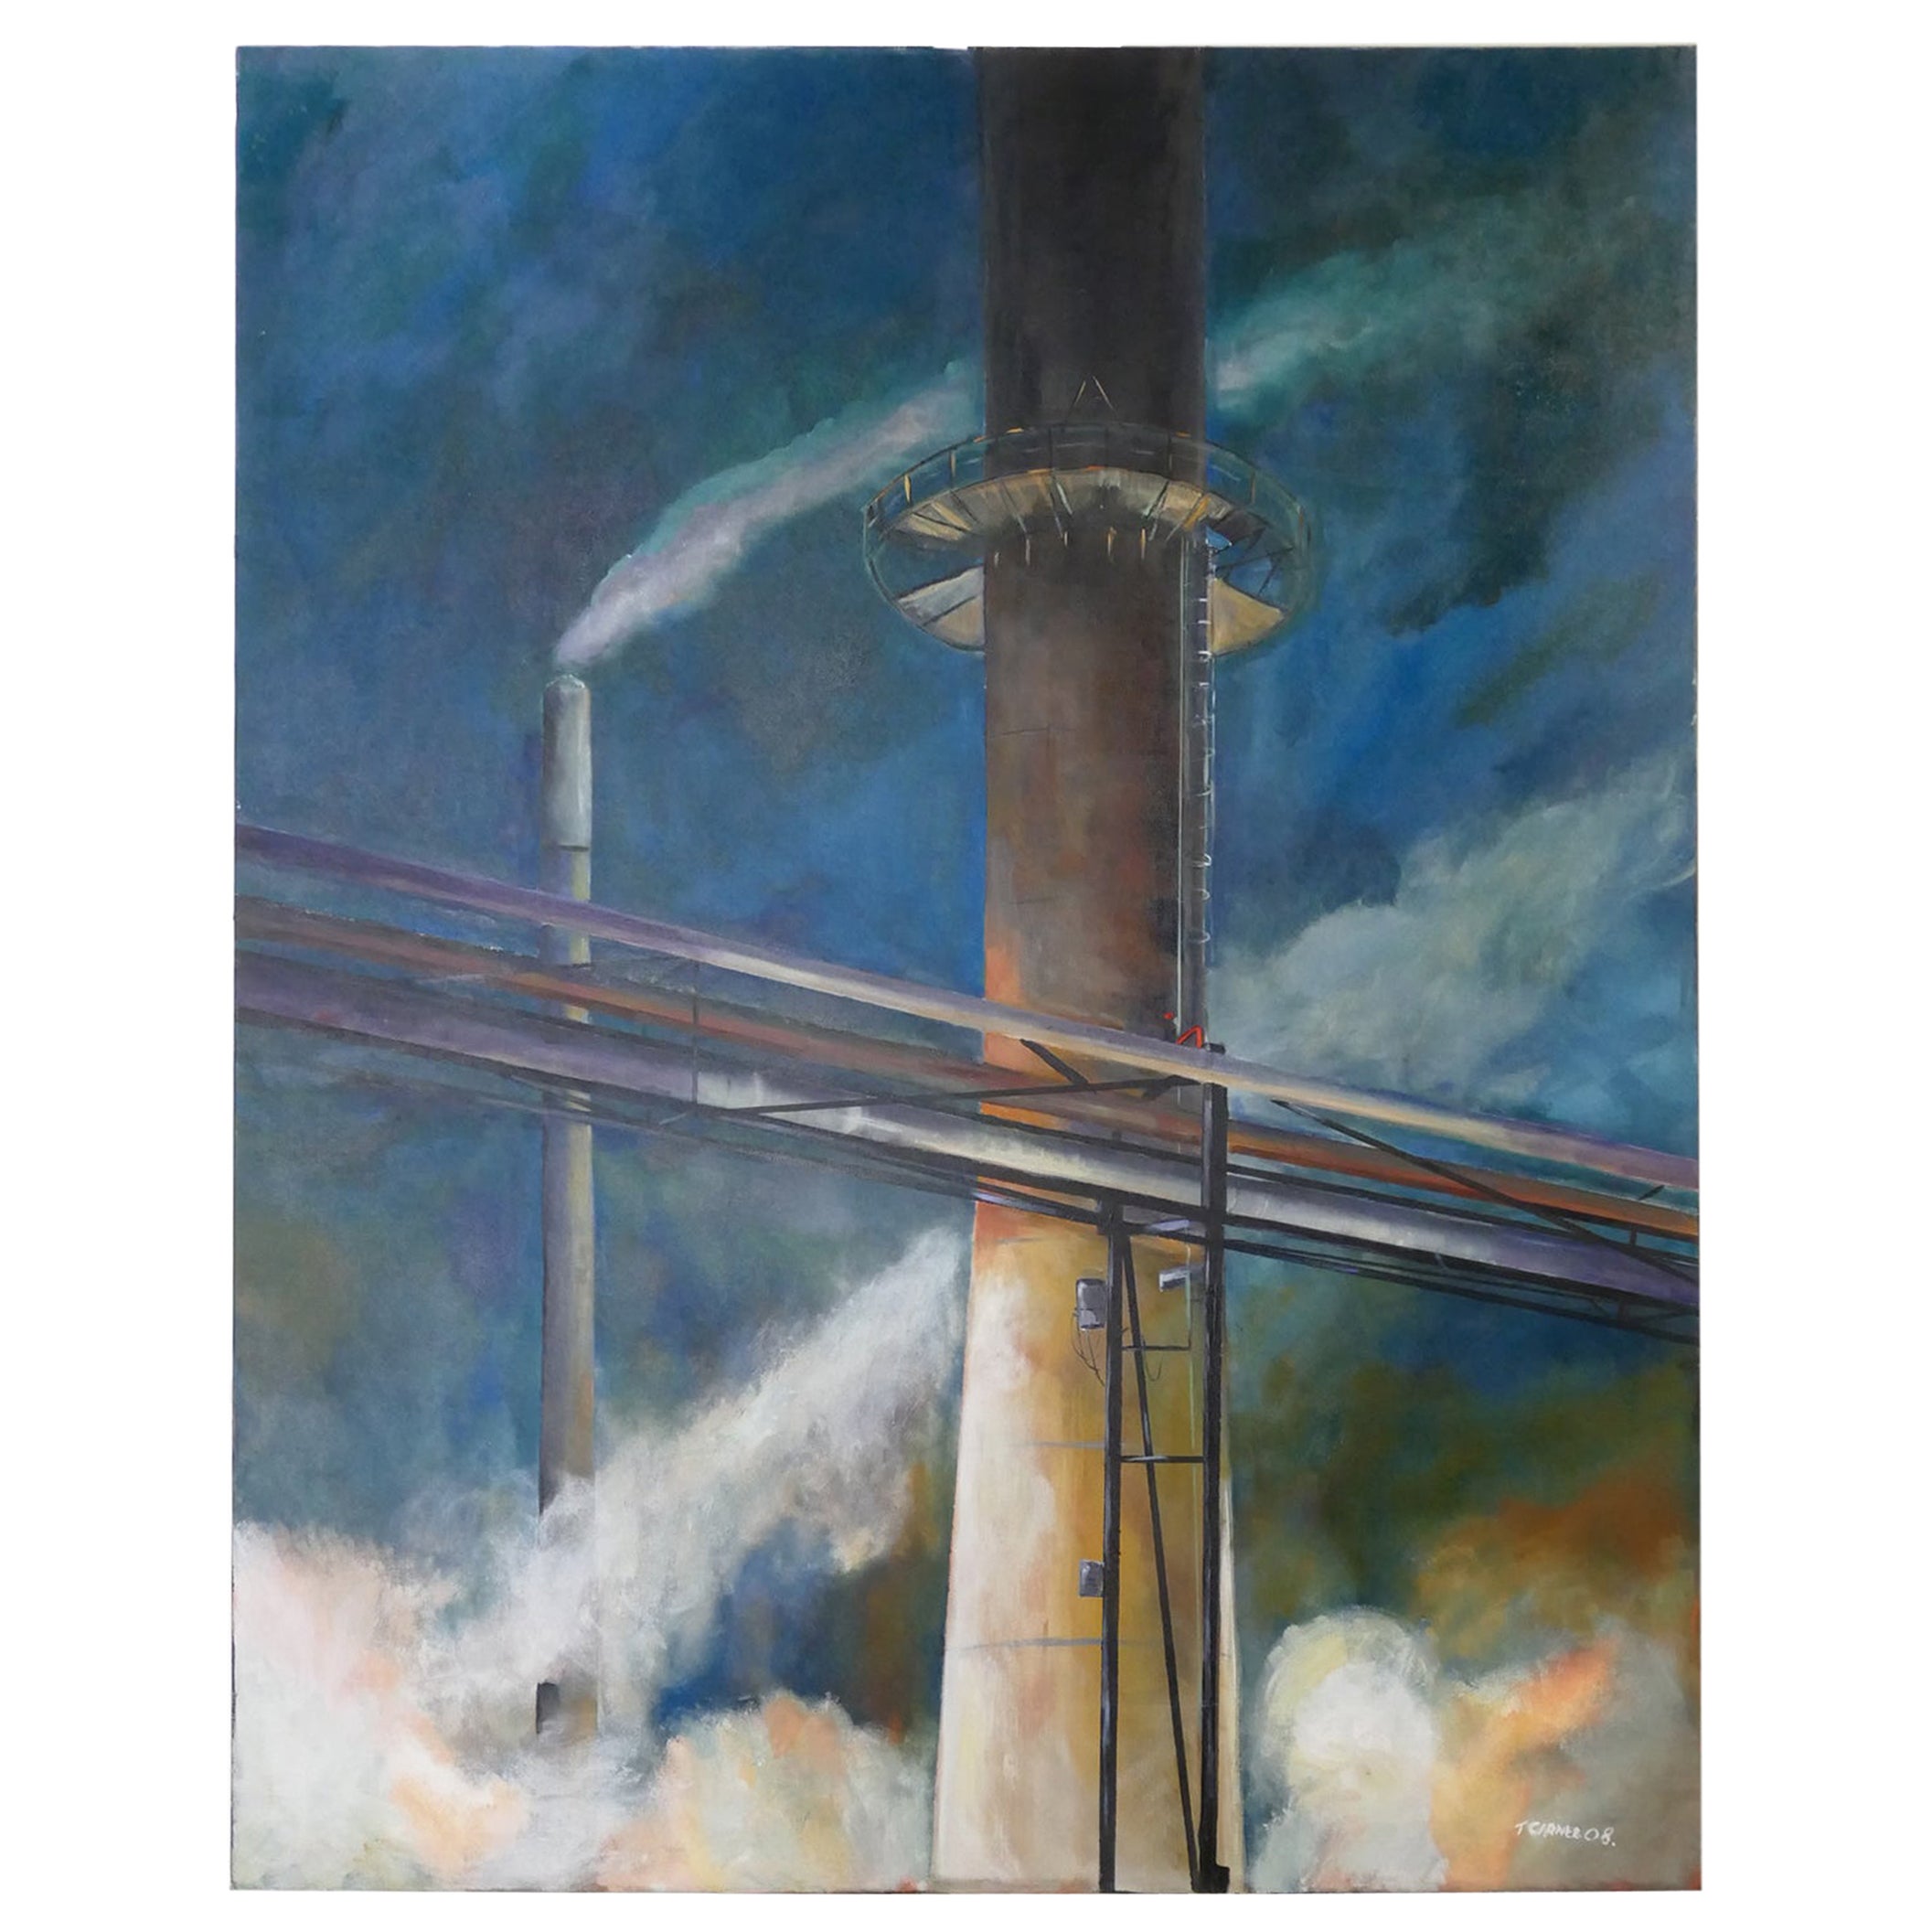 Large Industrial Oil on Canvas Titled ‘Pilkington Glass’